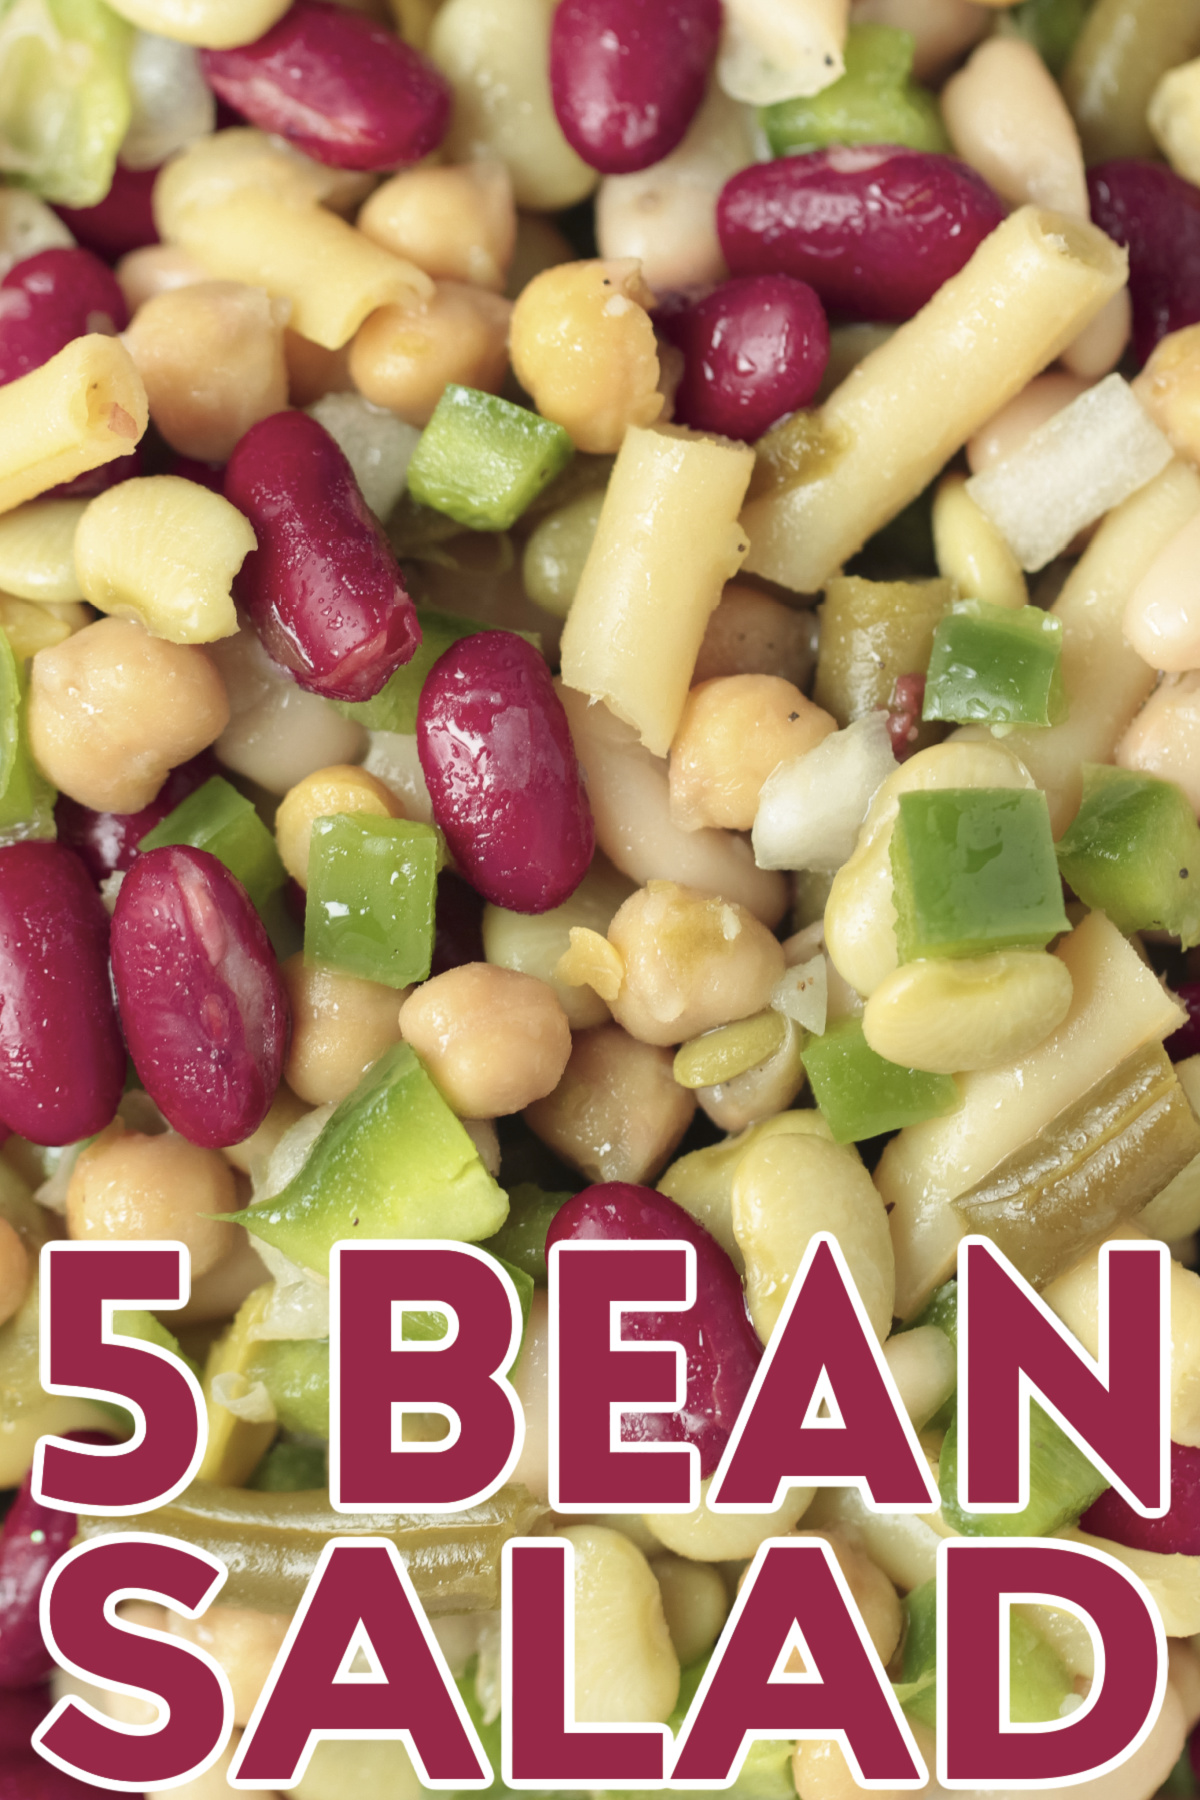 Get the perfect mix of flavor and nutrition with this easy 5 bean salad recipe. Whip up this classic dish in no time for any occasion!